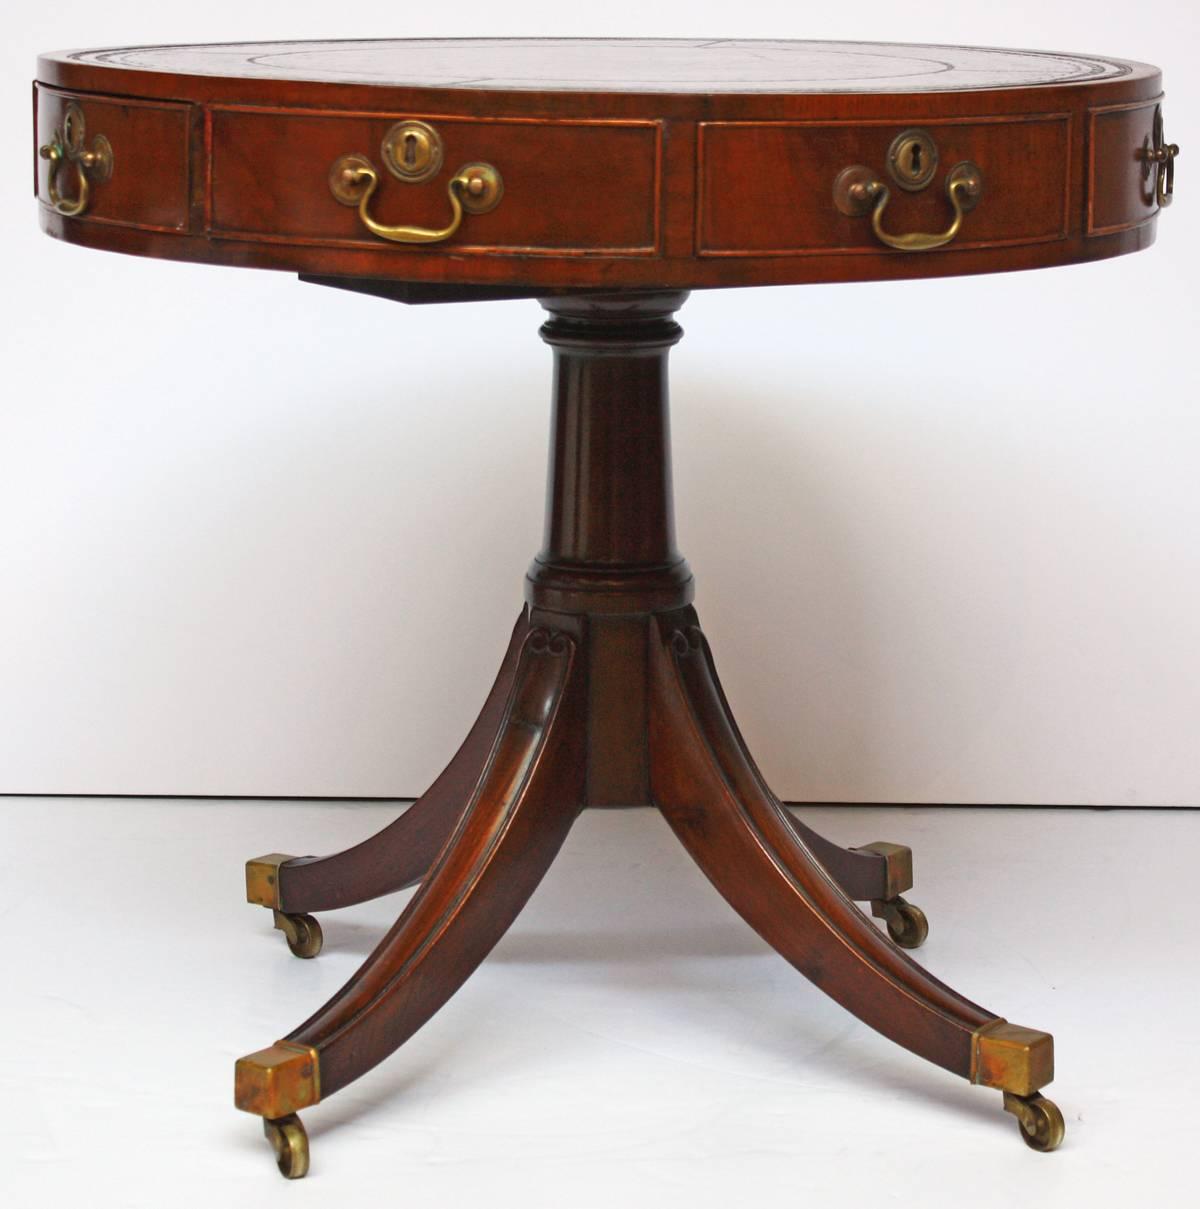 A George III drum table with mahogany and leather inset rotating top, four drawers, pedestal base, on casters, gun barrel stem.

(Turned column pedestal with four splayed legs).